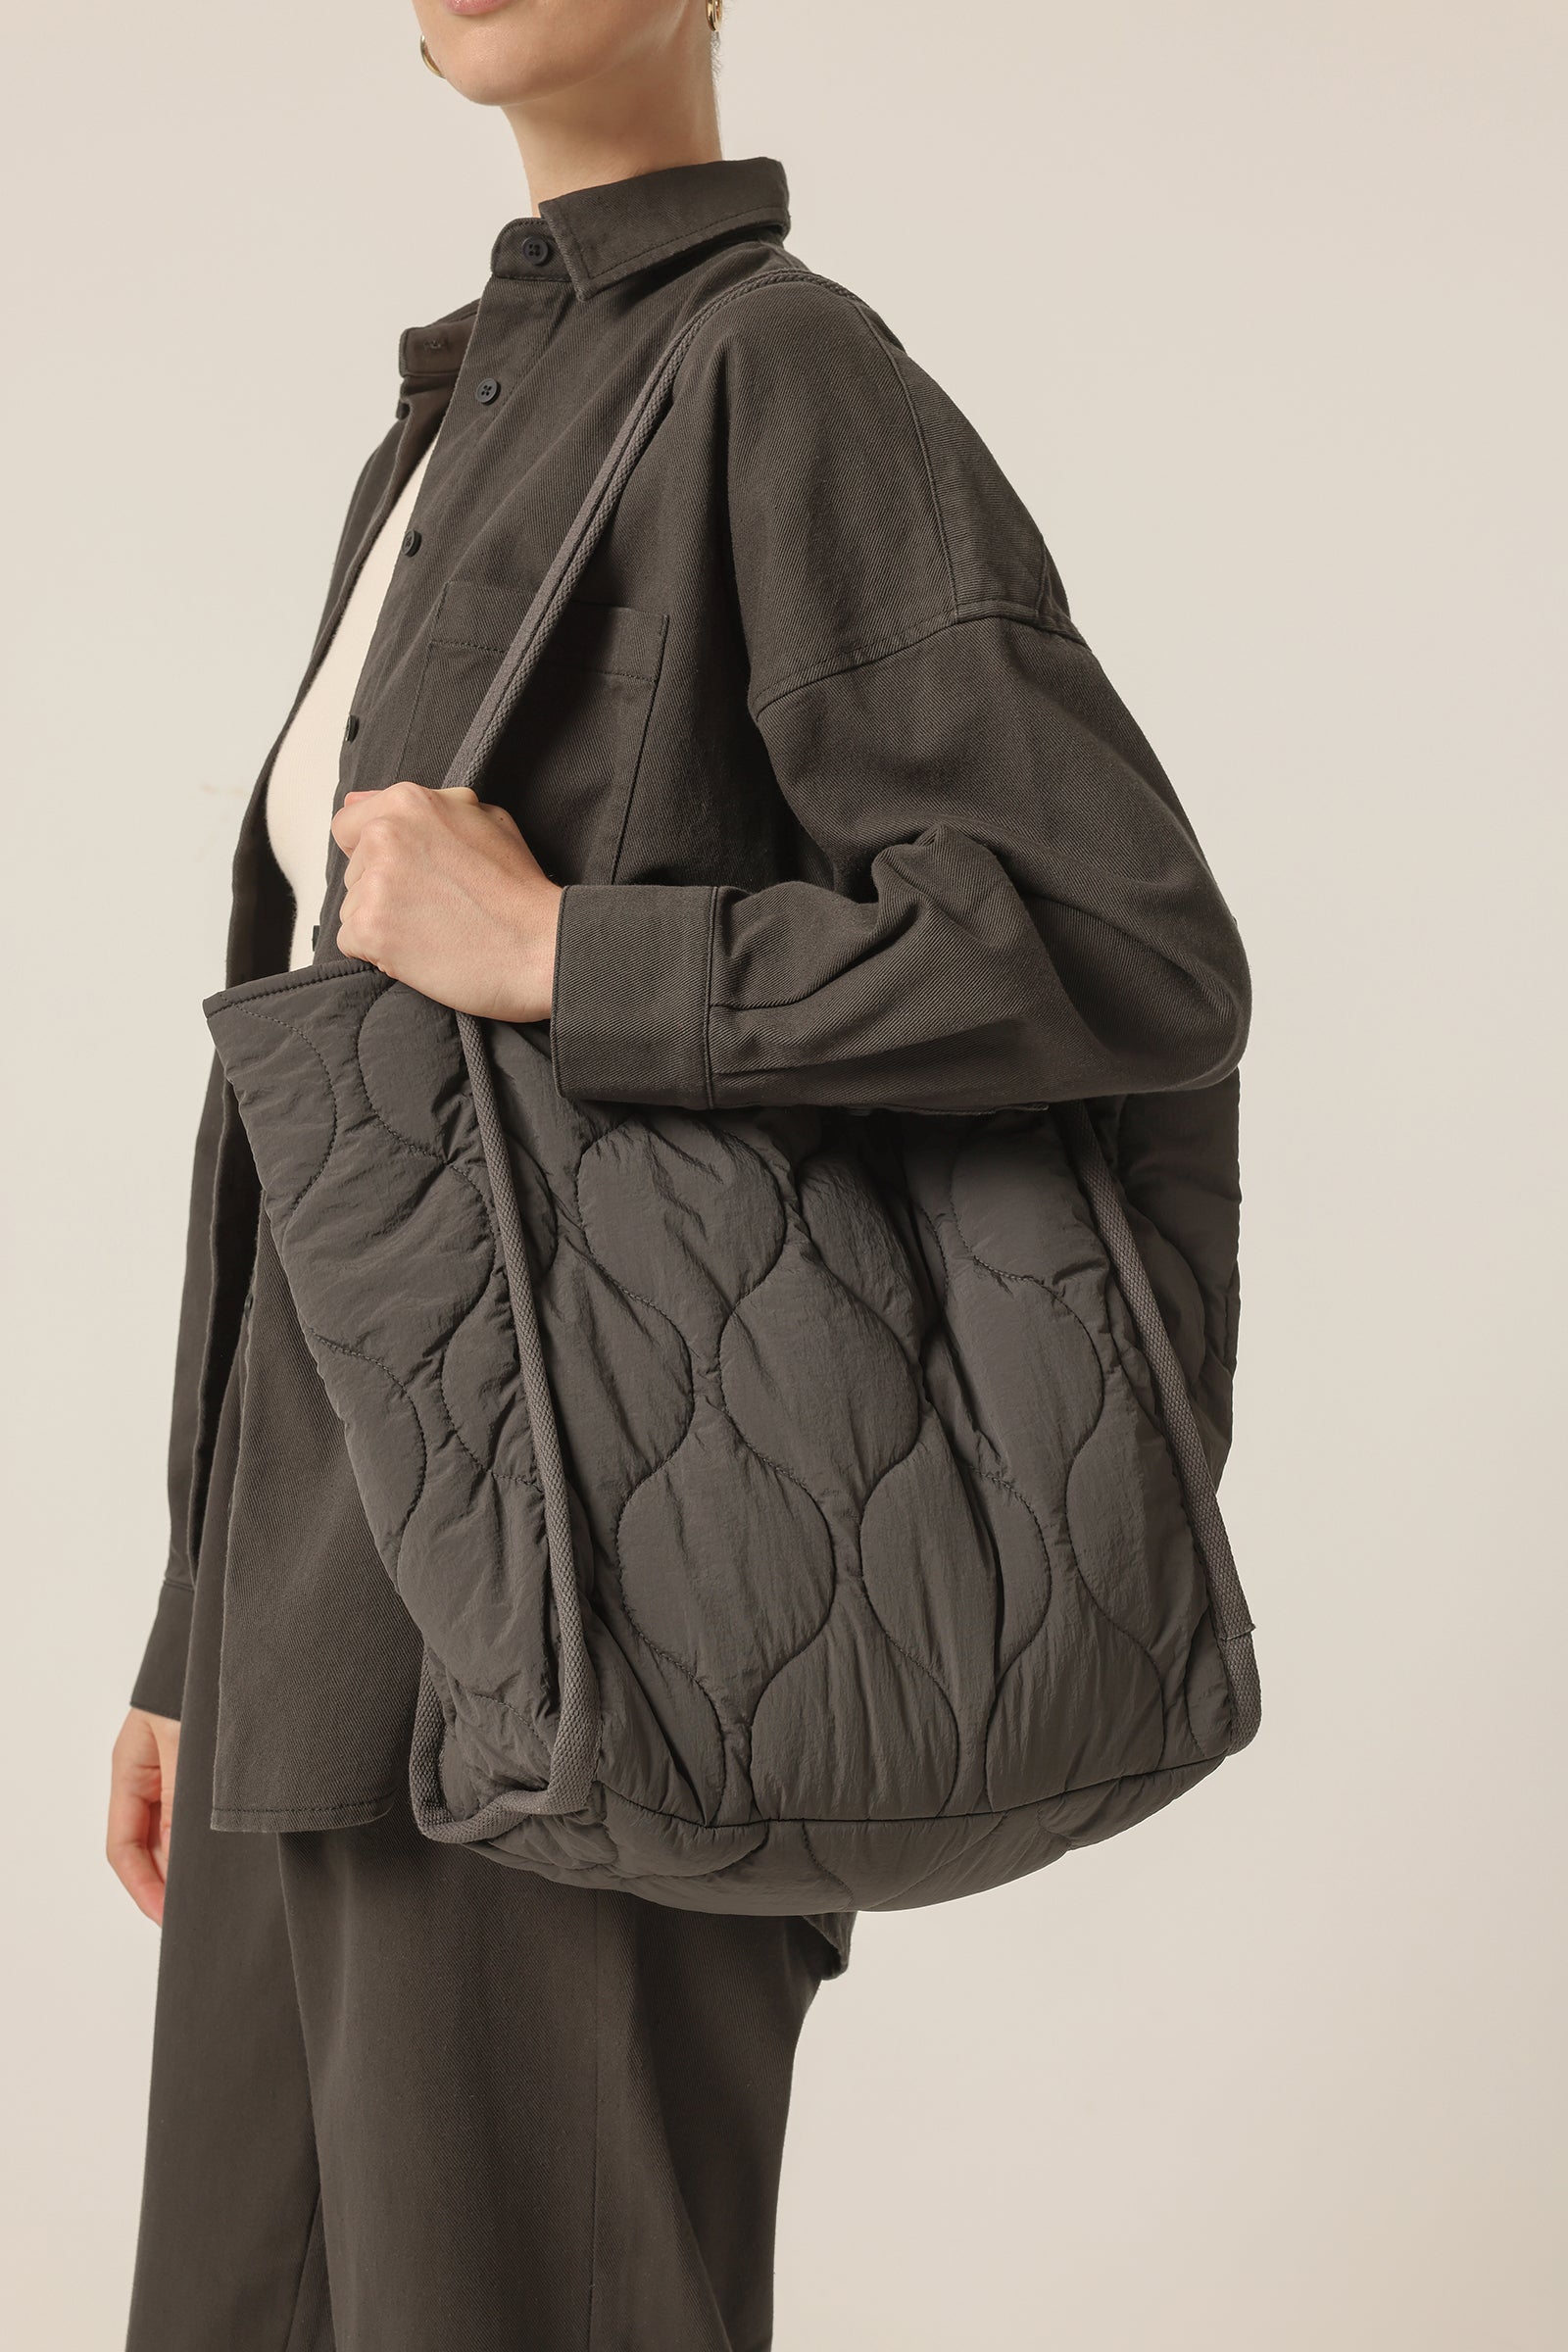 Nude Lucy Nude Puffer Tote In A Dark Grey In A Brown Coal Colour 